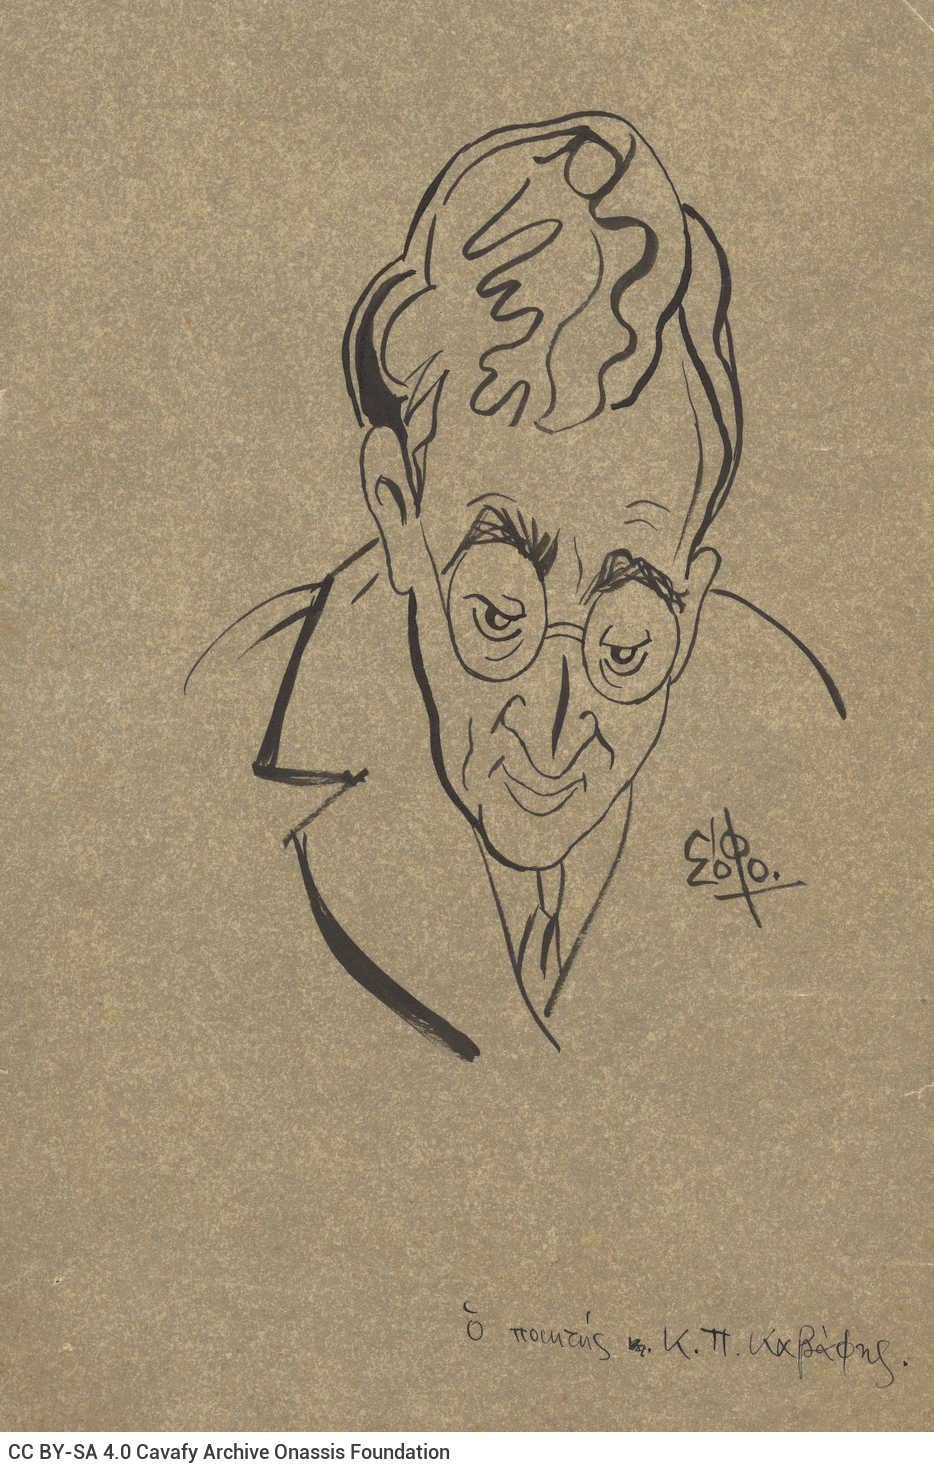 Sketch in ink by Sofo (Sofoklis Antoniadis) on rice paper. It depicts Cavafy in frontal view, wearing glasses, in a suit and 